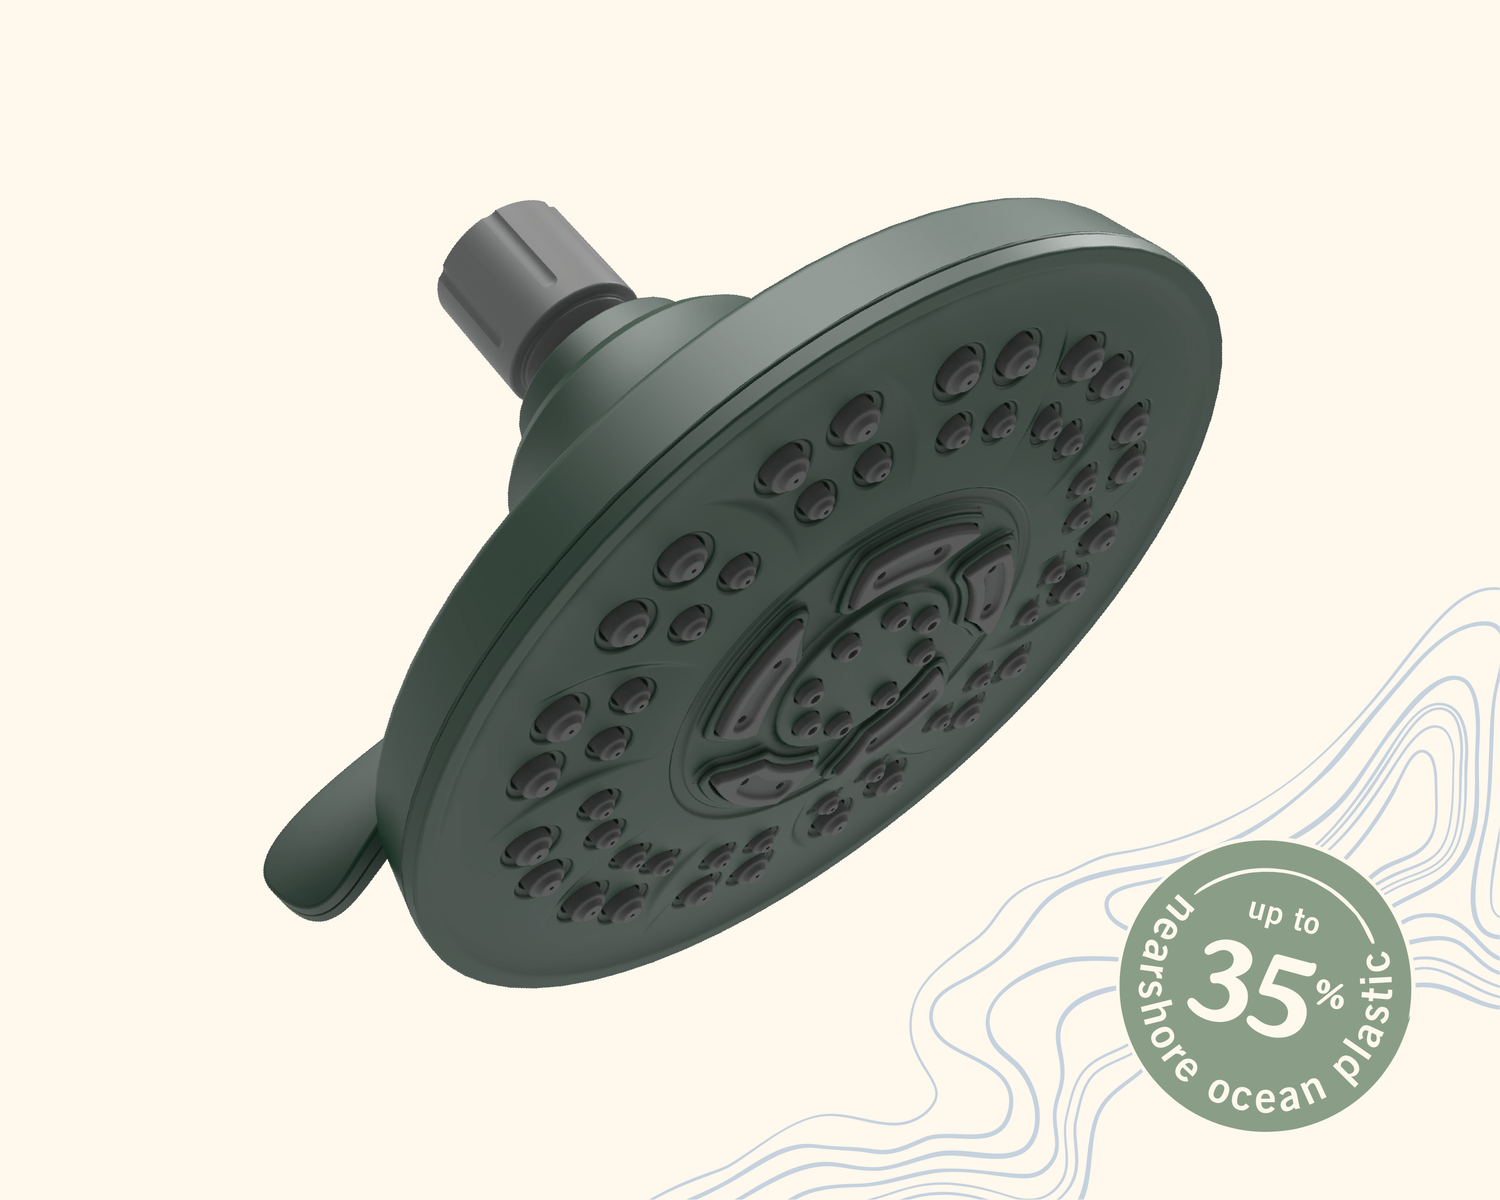 Our Ocean Plastic Shower Head uses up to 35% recycled nearshore ocean plastic.